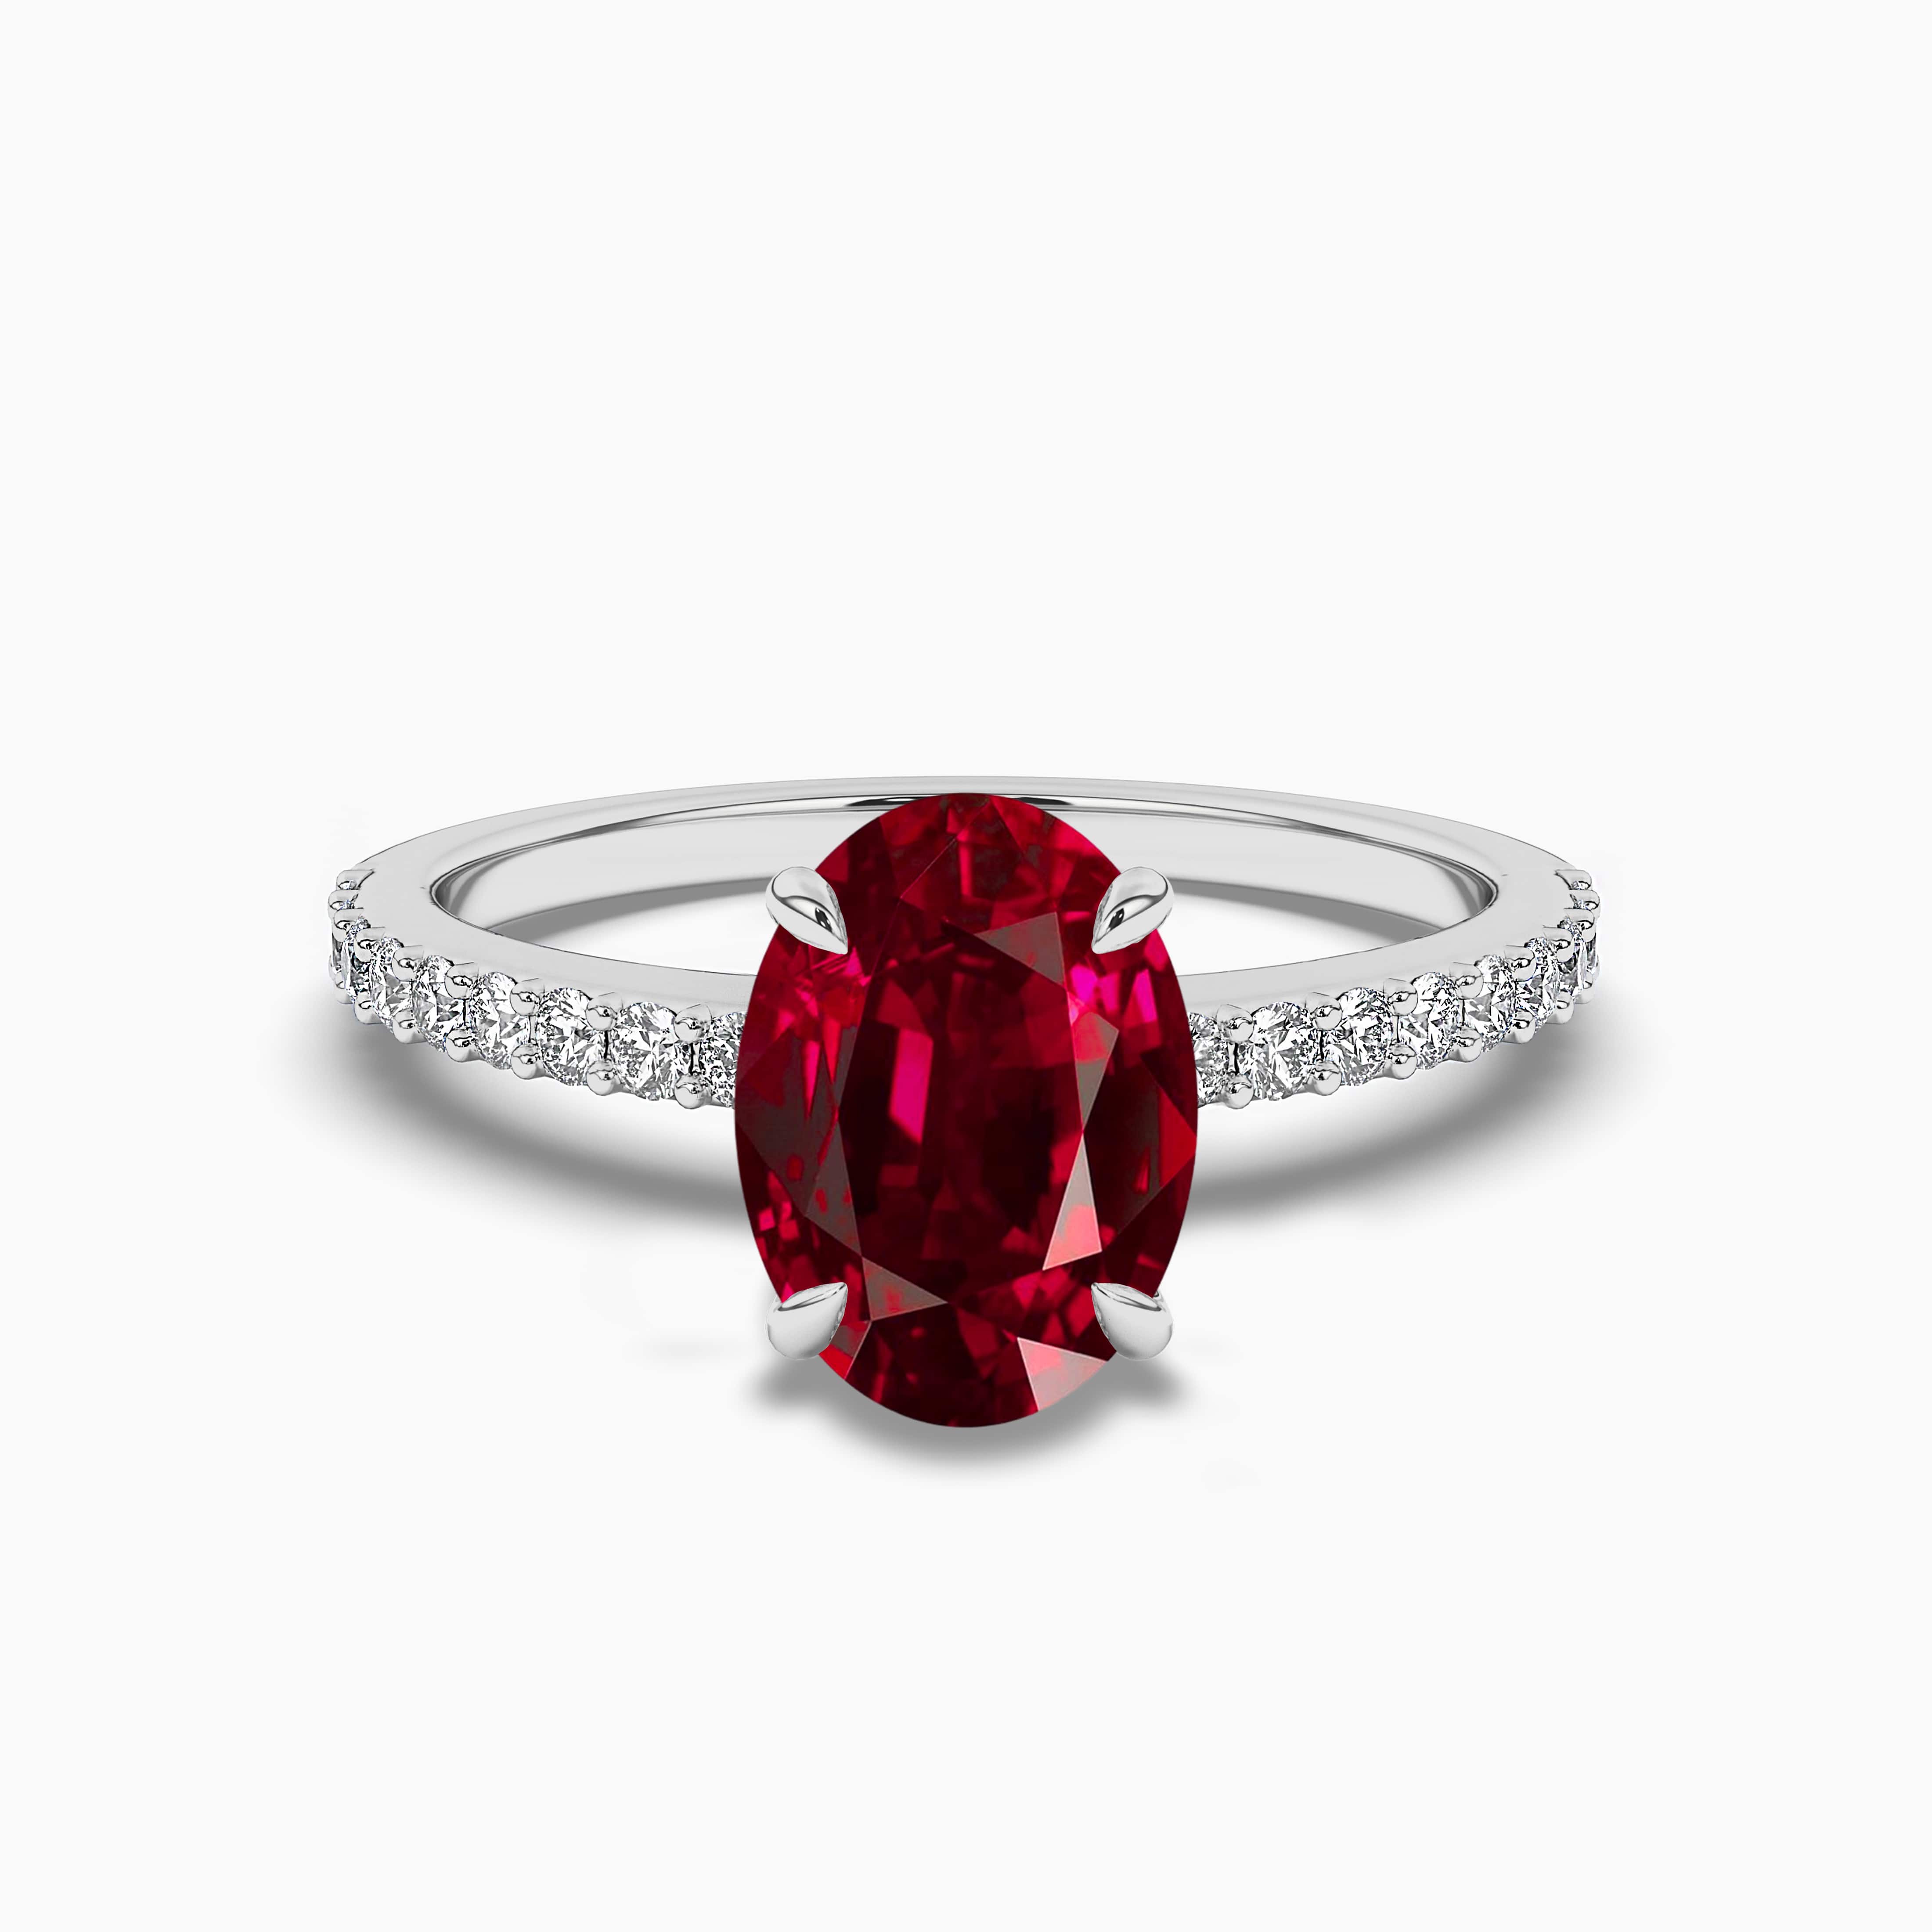 WHITE GOLD OVAL RUBY AND DIAMONDS ENGAGEMENT RING